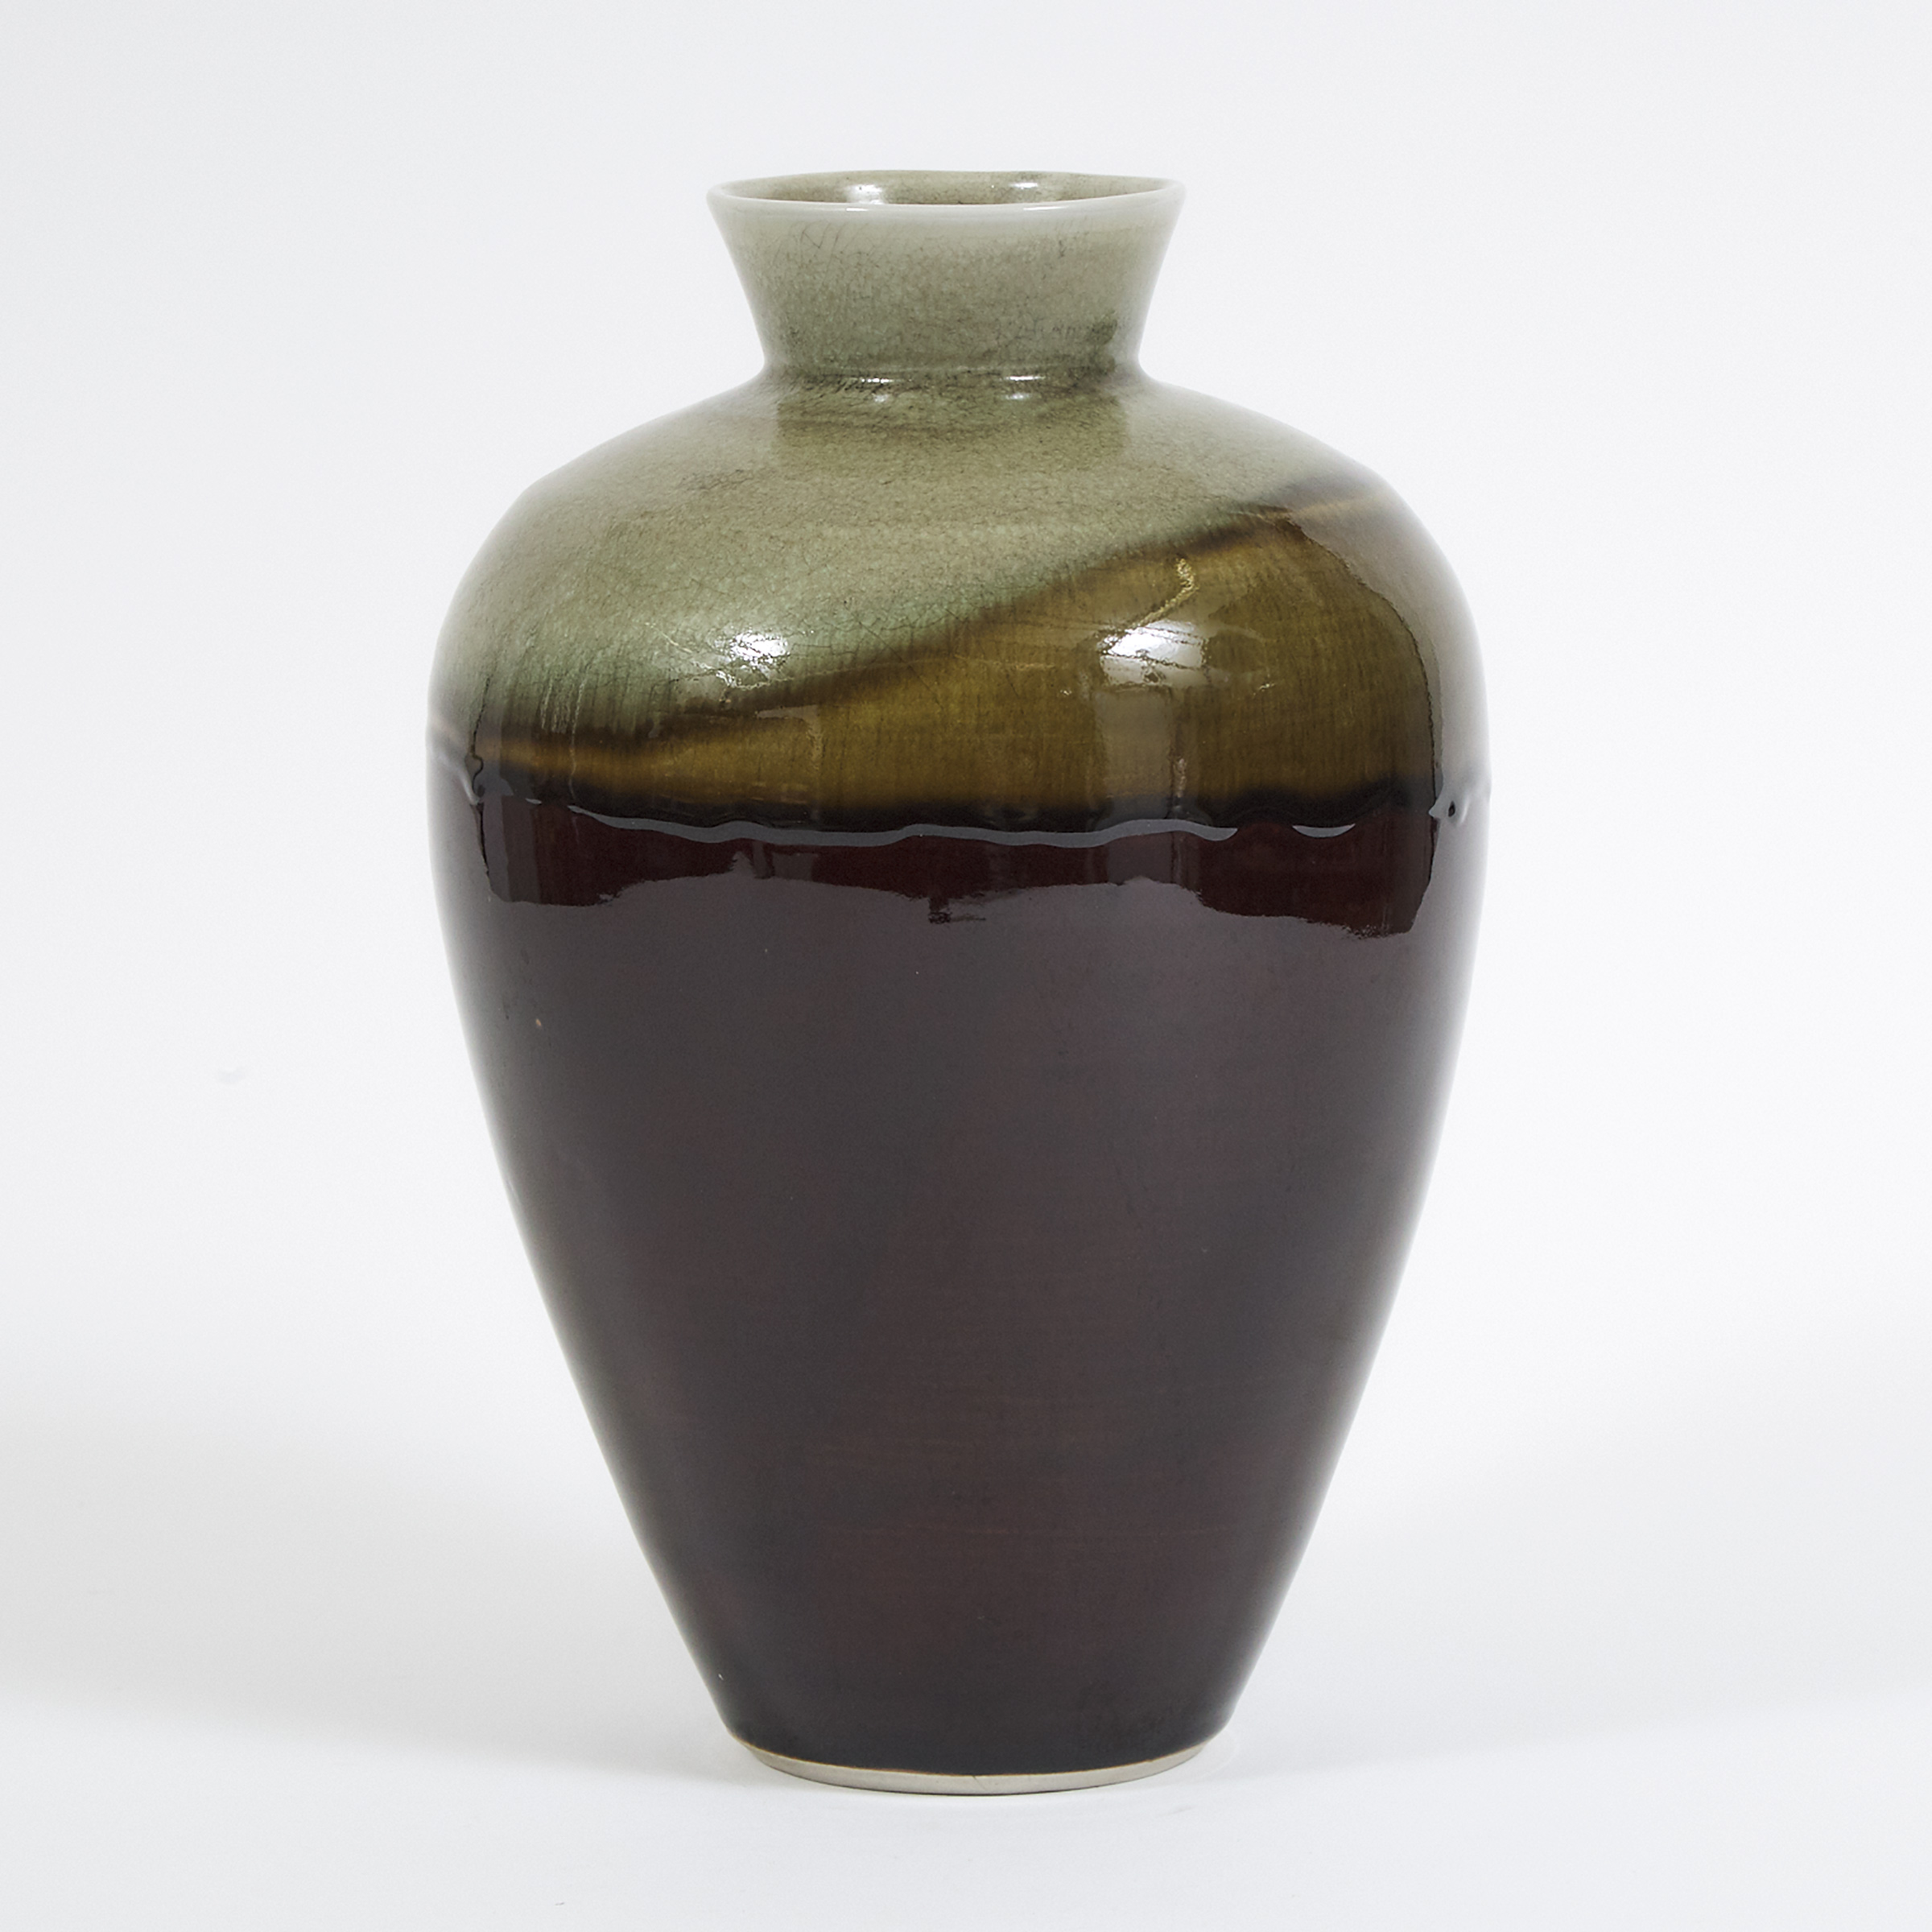 Harlan House (Canadian, b.1943), Grey and Brown Glazed Vase, 1994